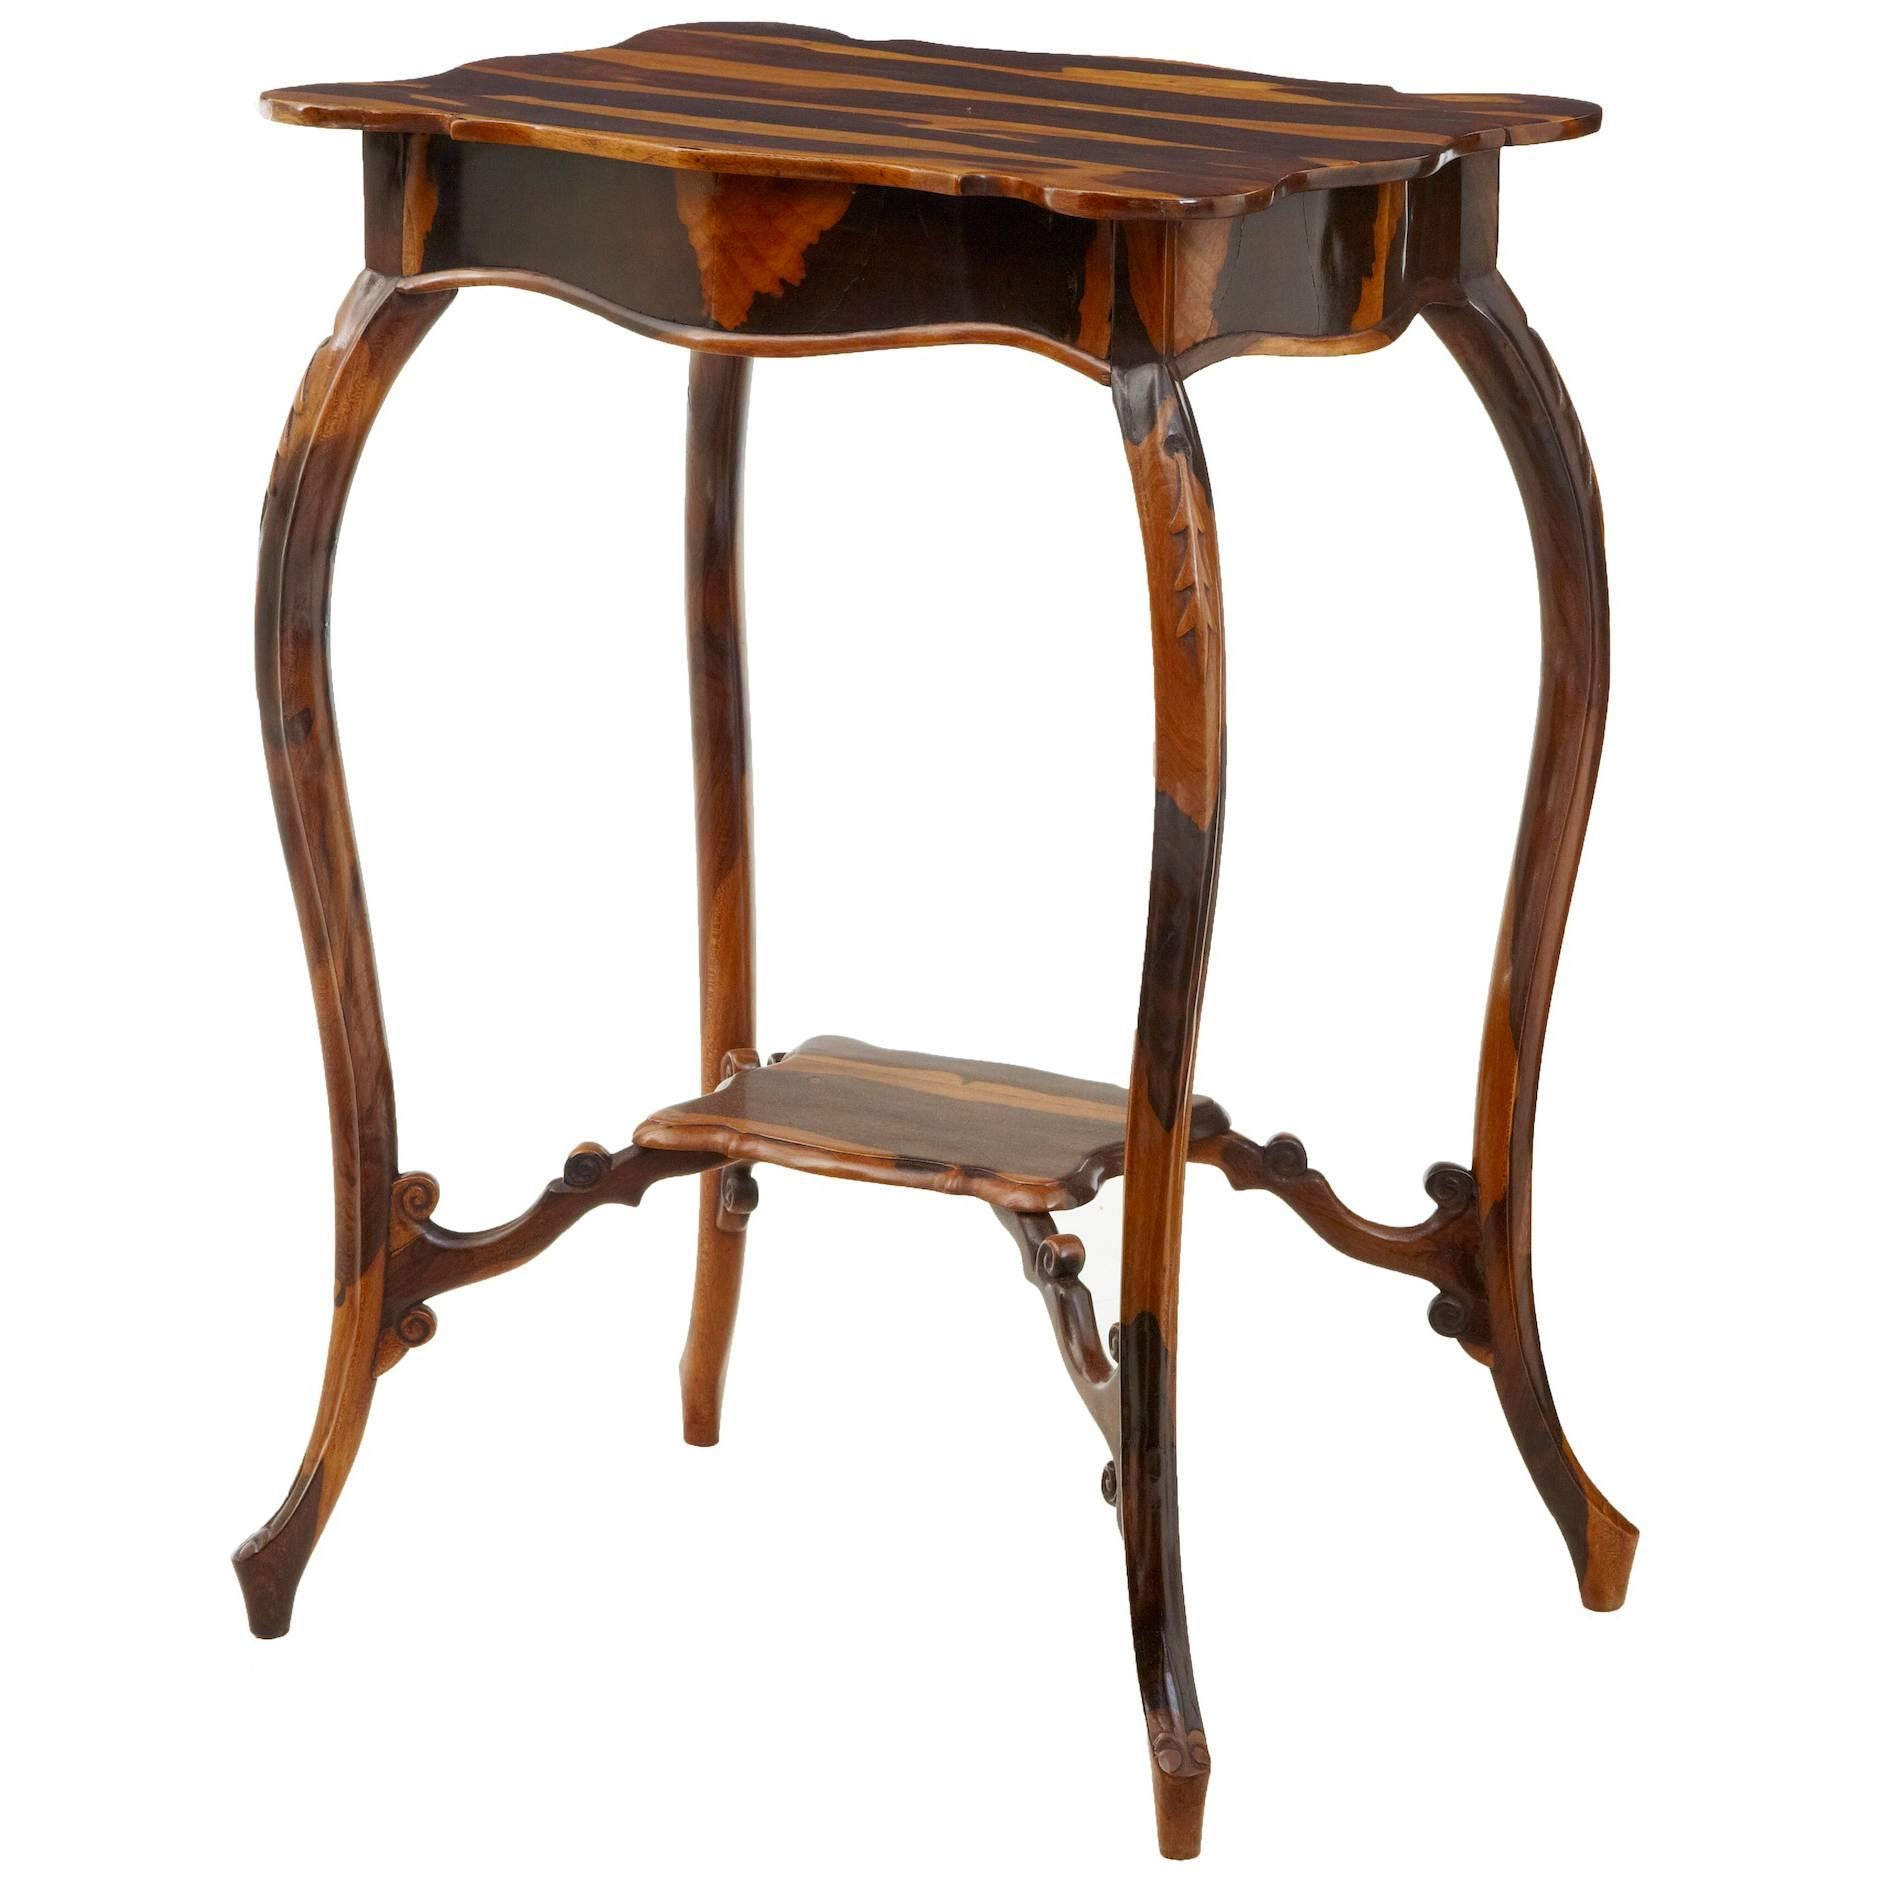 Rare 19th Century Cordia Wood Occasional Table from Barbados